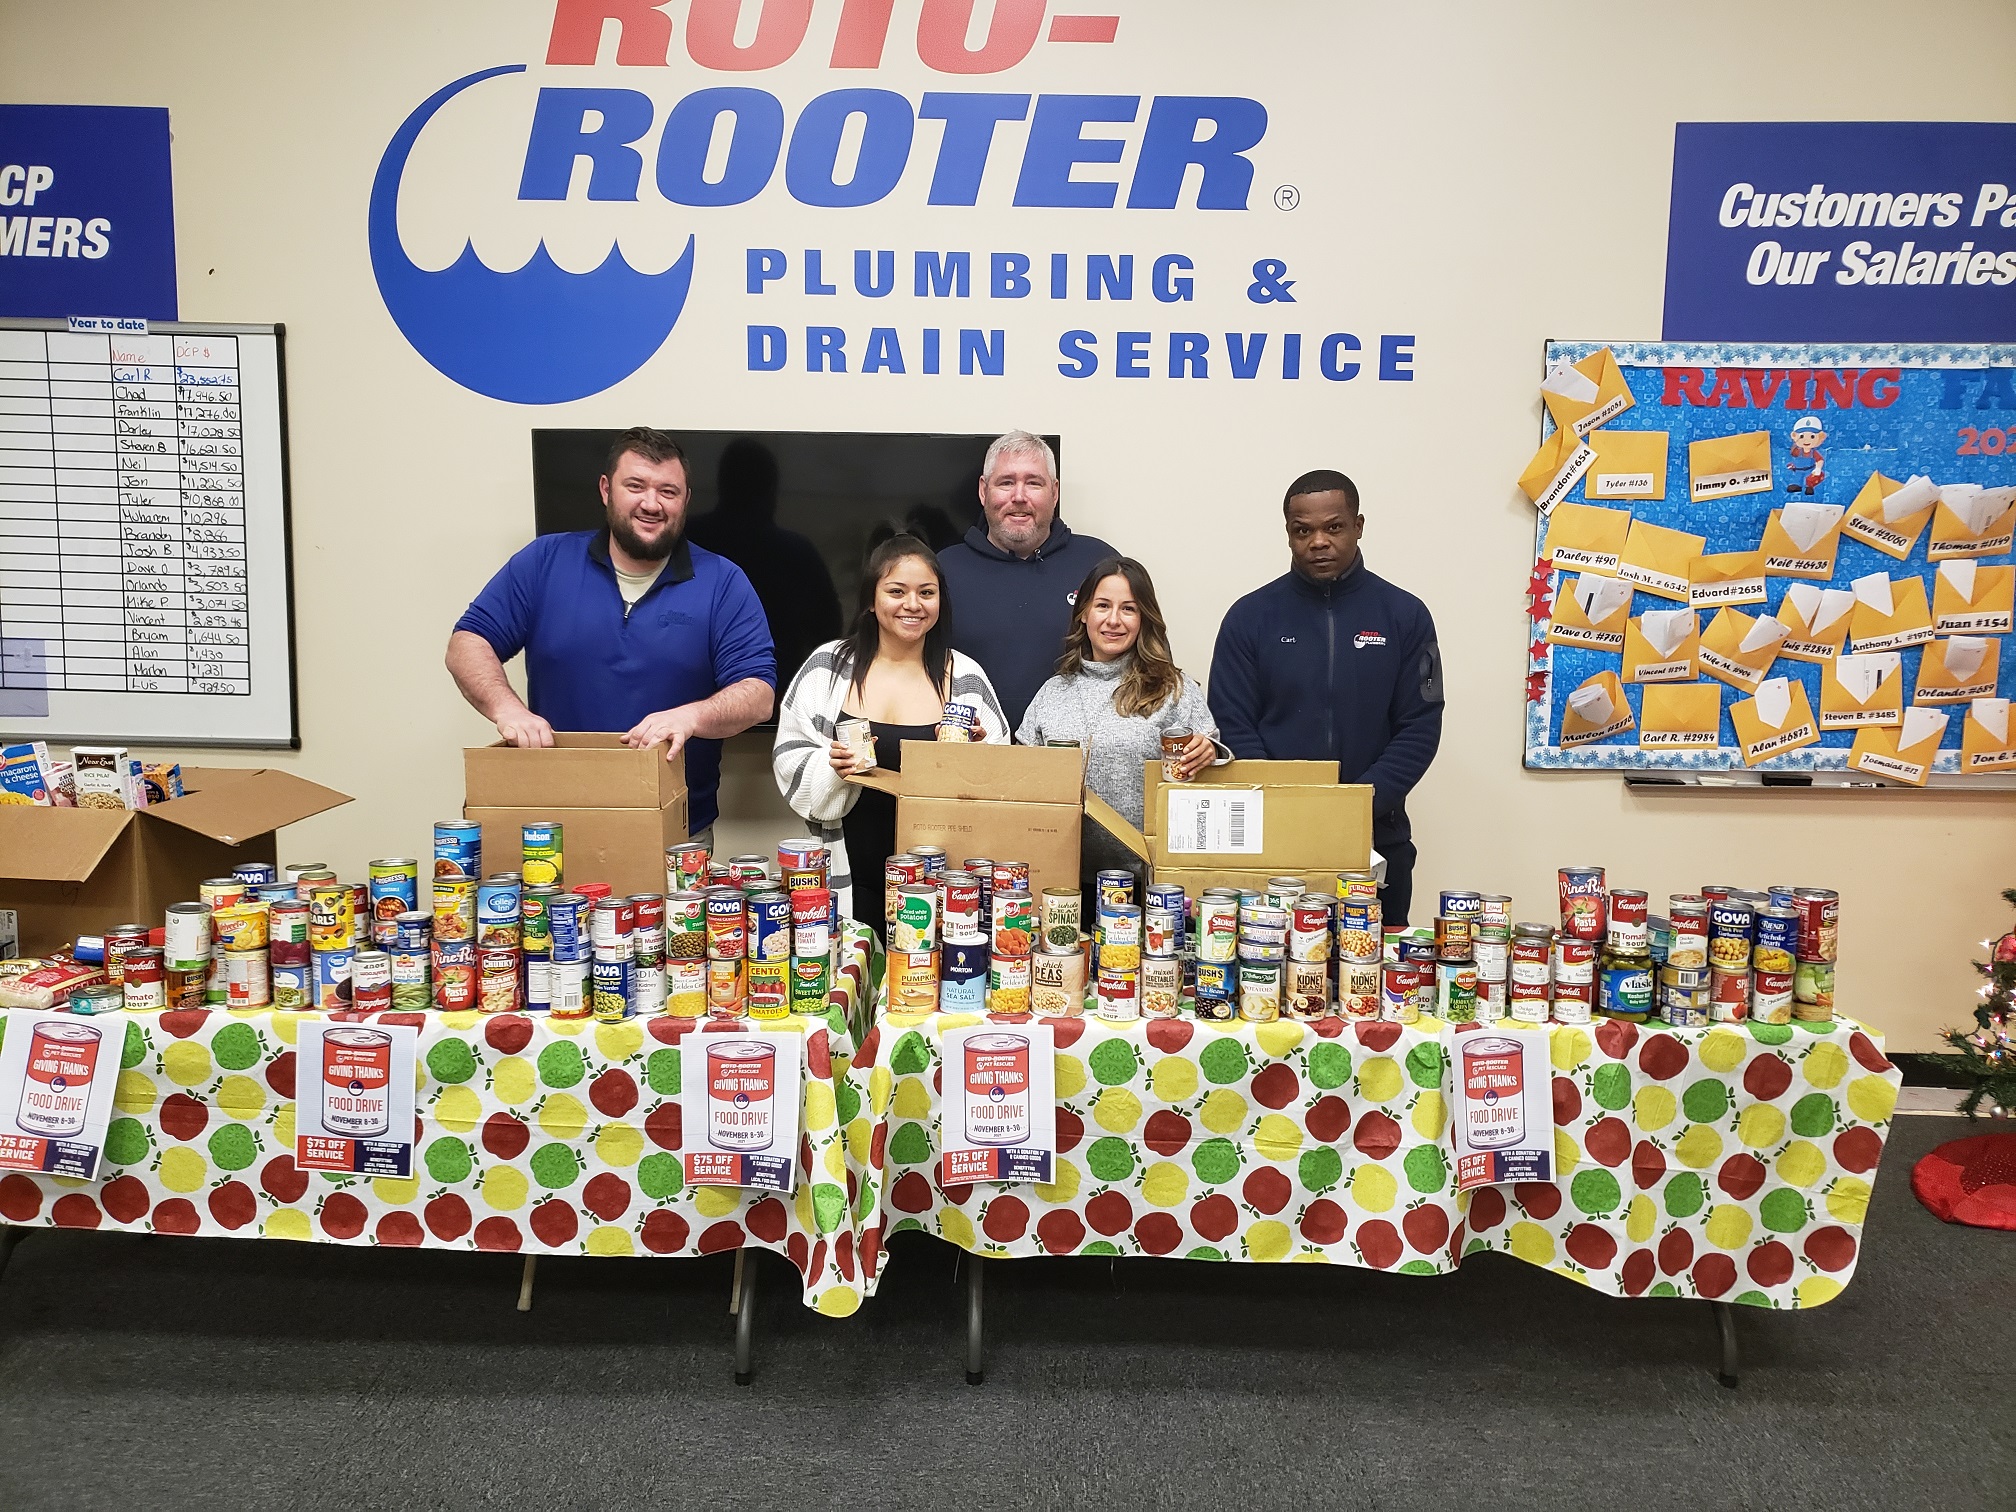 Roto-Rooter Food Drive collections